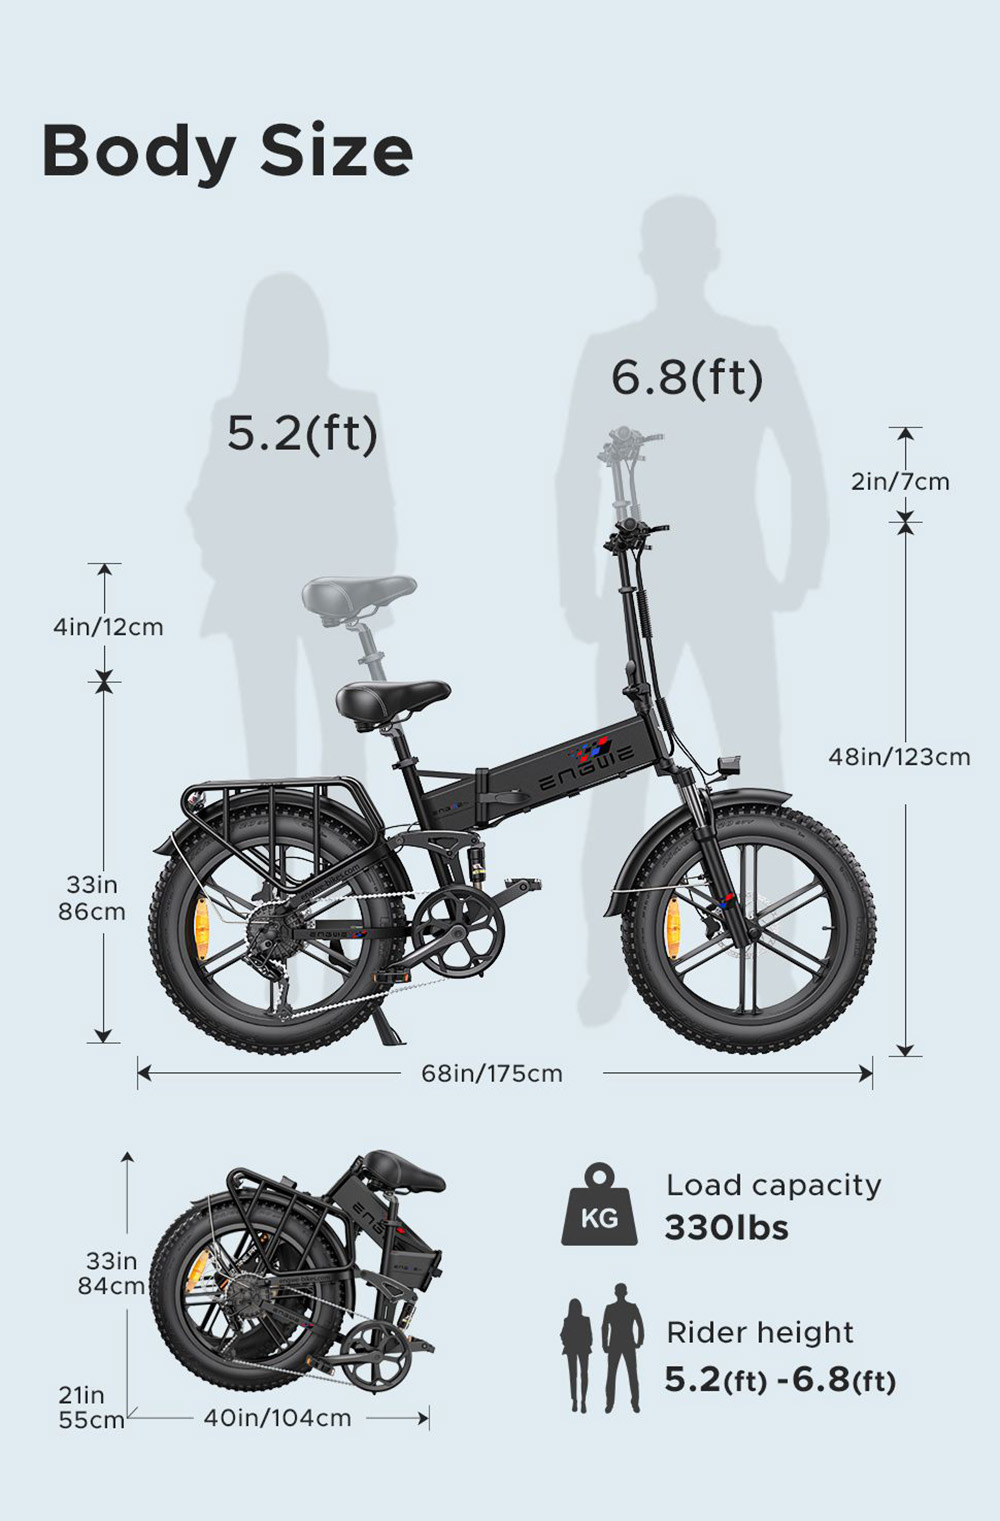 ENGWE ENGINE Pro Folding Electric Bicycle 20*4'' Fat Tire 750W Brushless Motor 48V 16Ah Battery 45km/h Max Speed - Grey